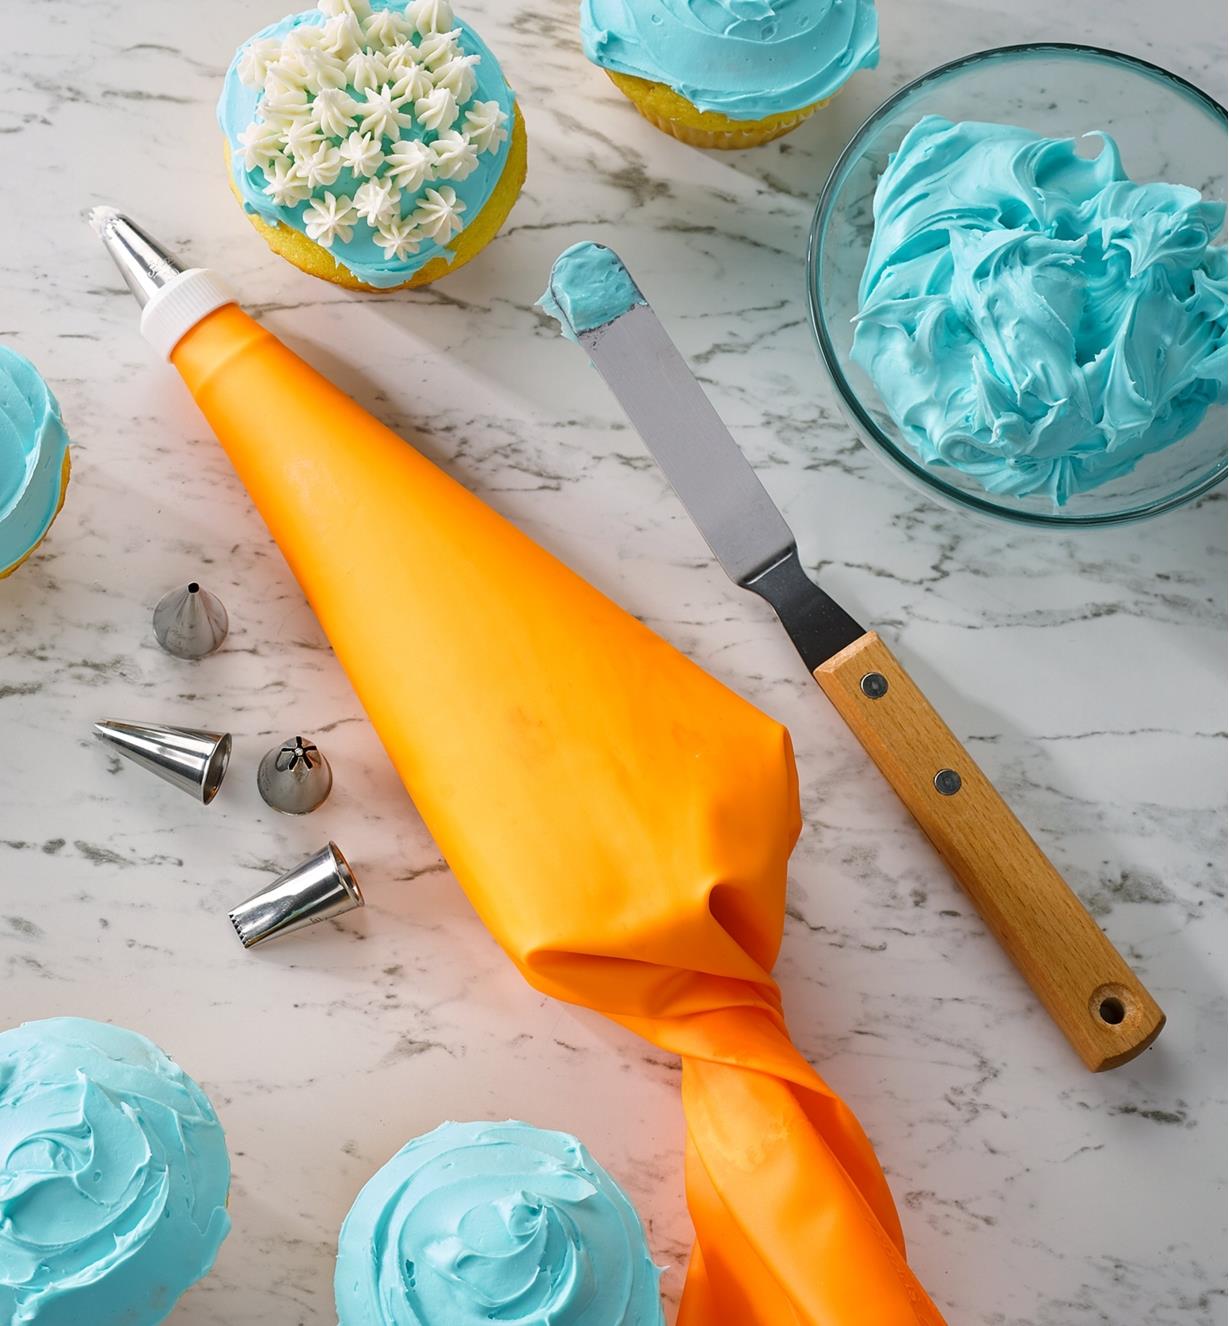 The cake decorating set with frosted cupcakes